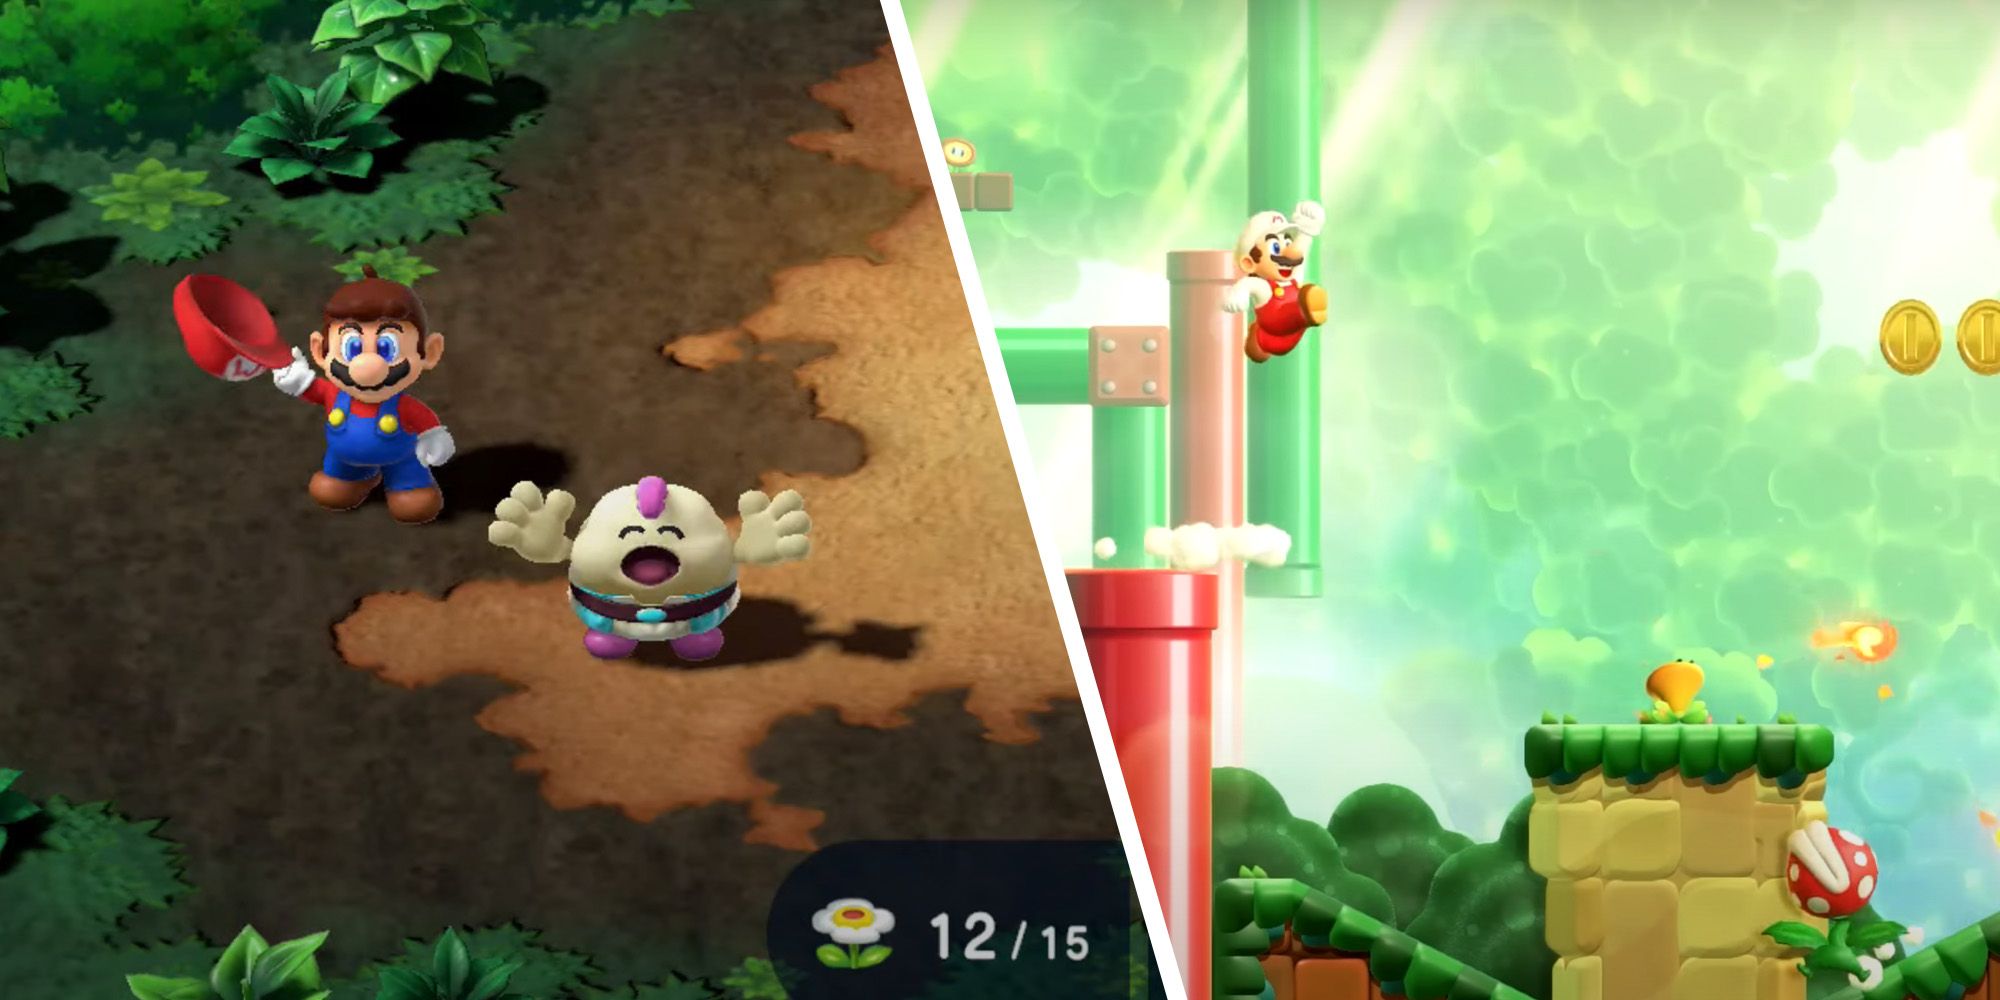 Split image of Mario and Mallow in Super Mario RPG Remake and Fire Mario from Super Mario Bros Wonder